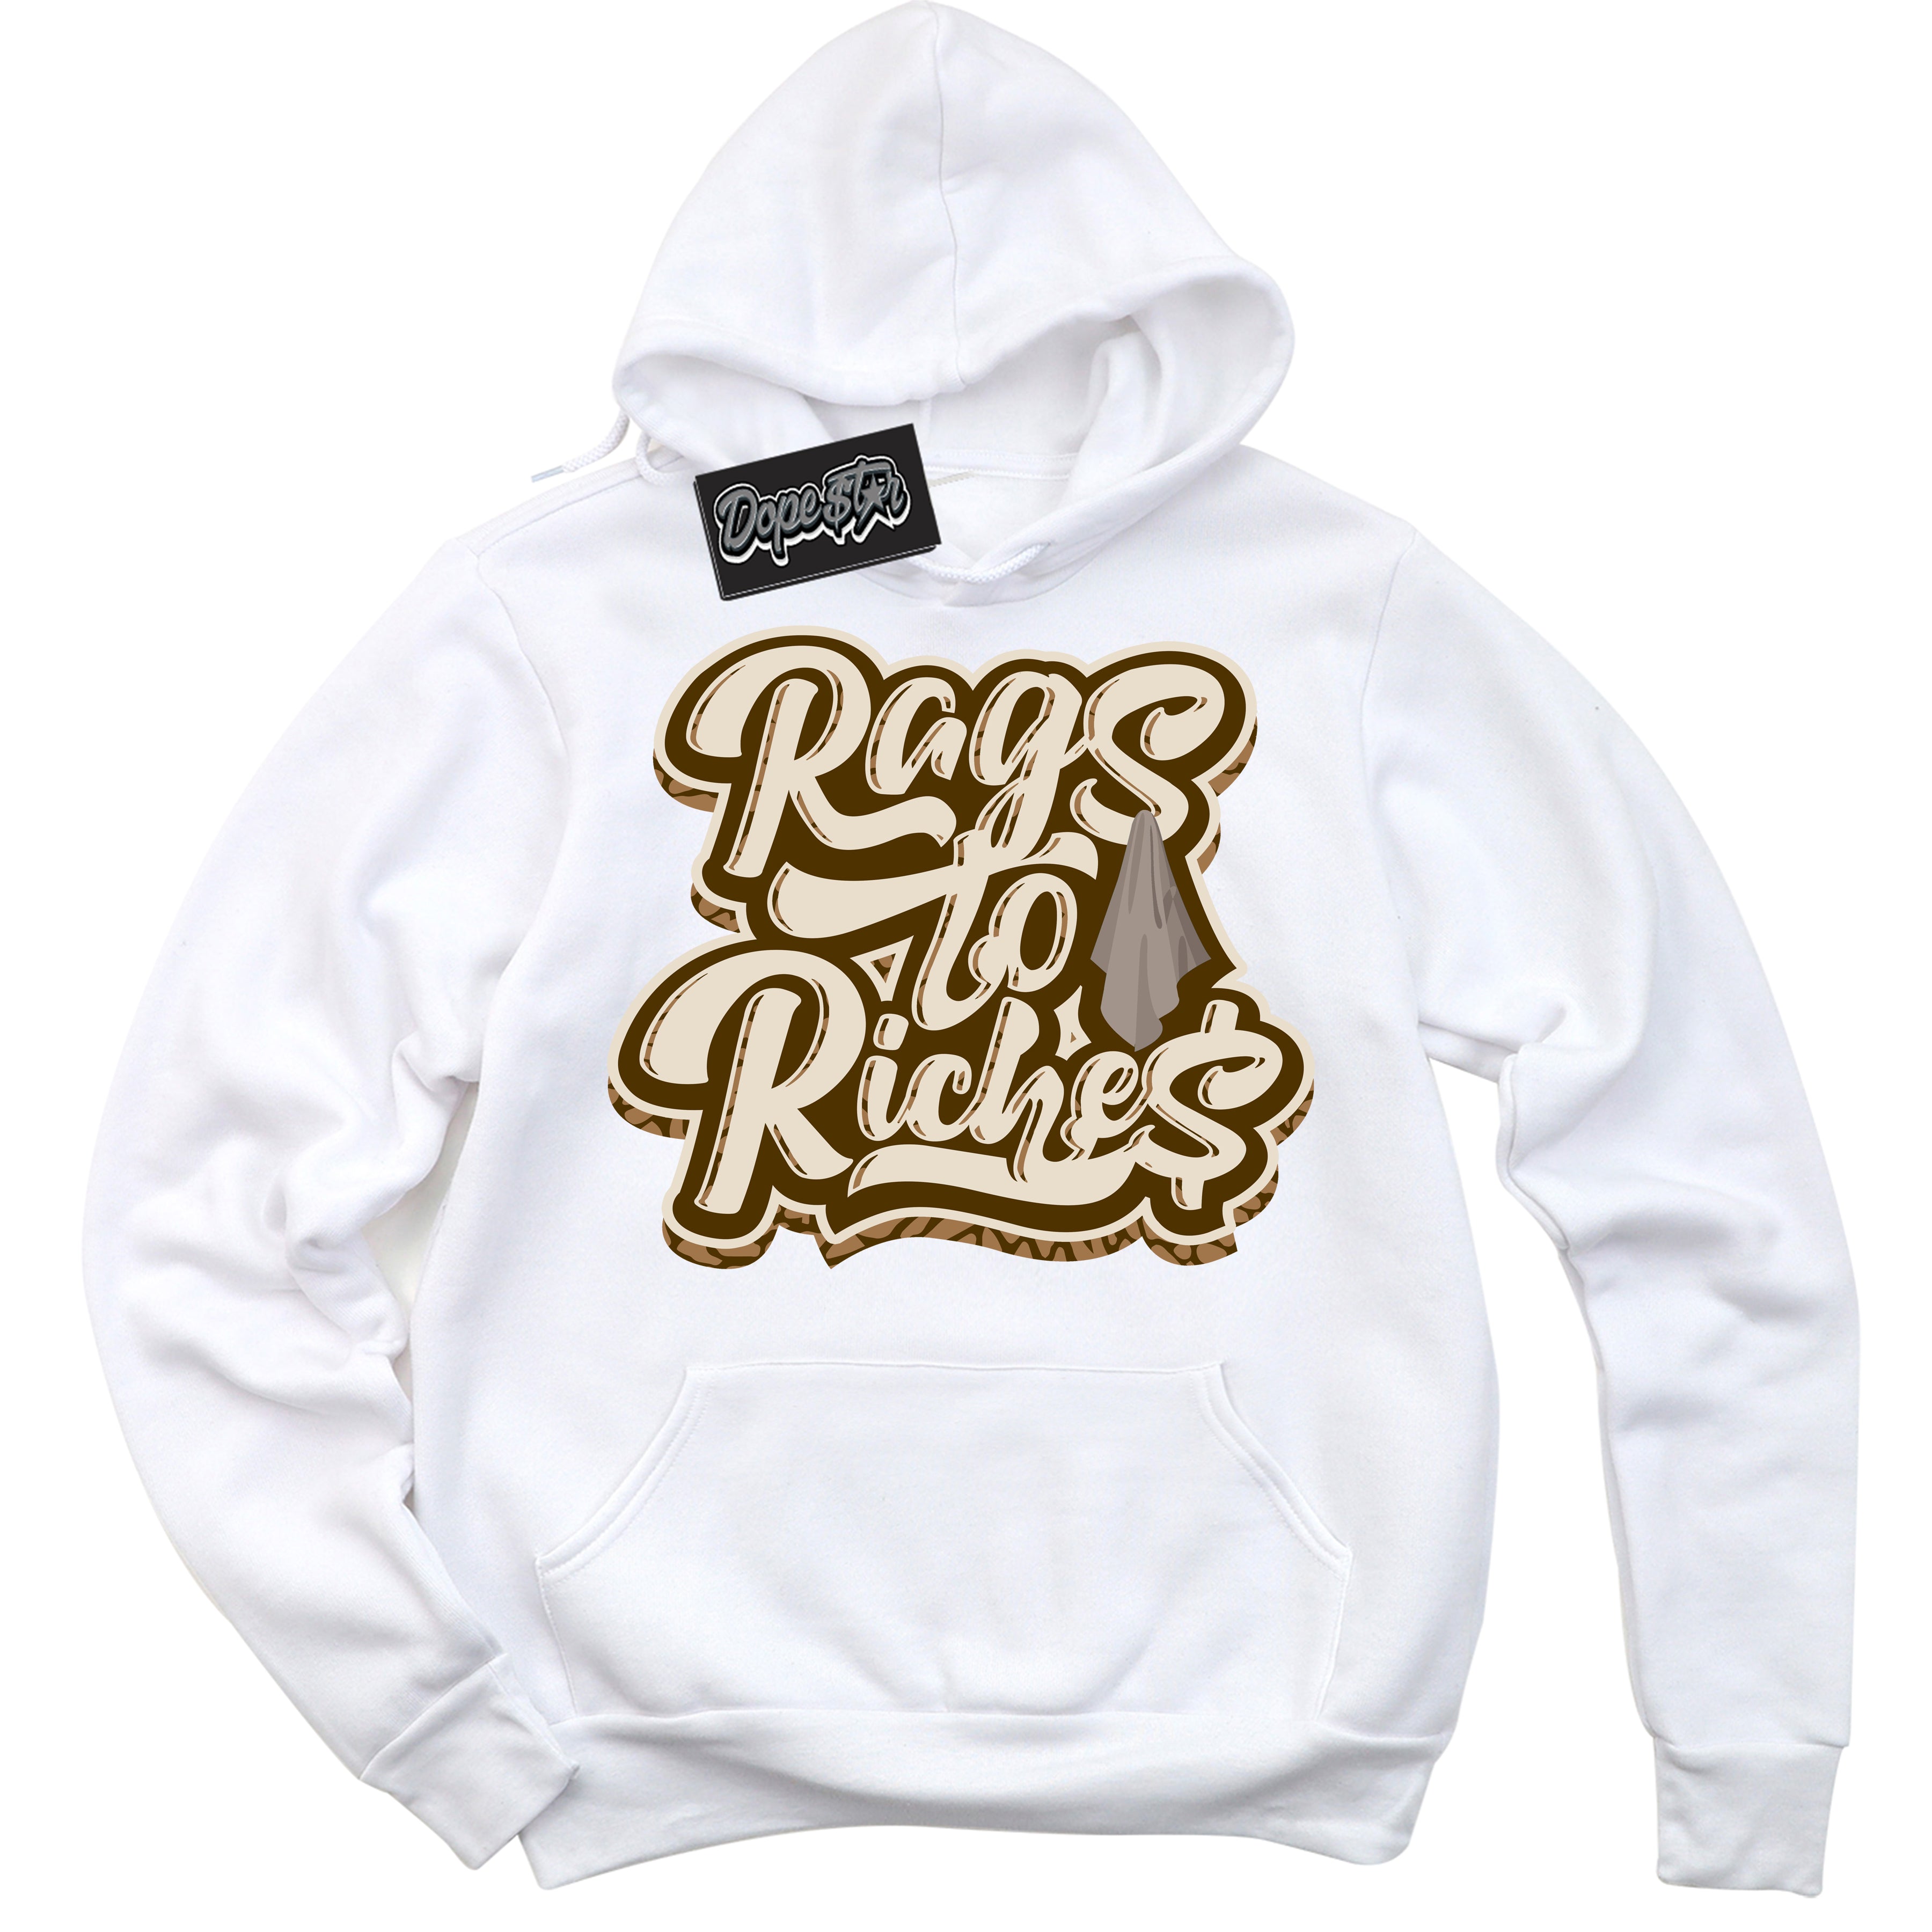 Cool White Graphic DopeStar Hoodie with “ Rags To Riches “ print, that perfectly matches Palomino 3s sneakers